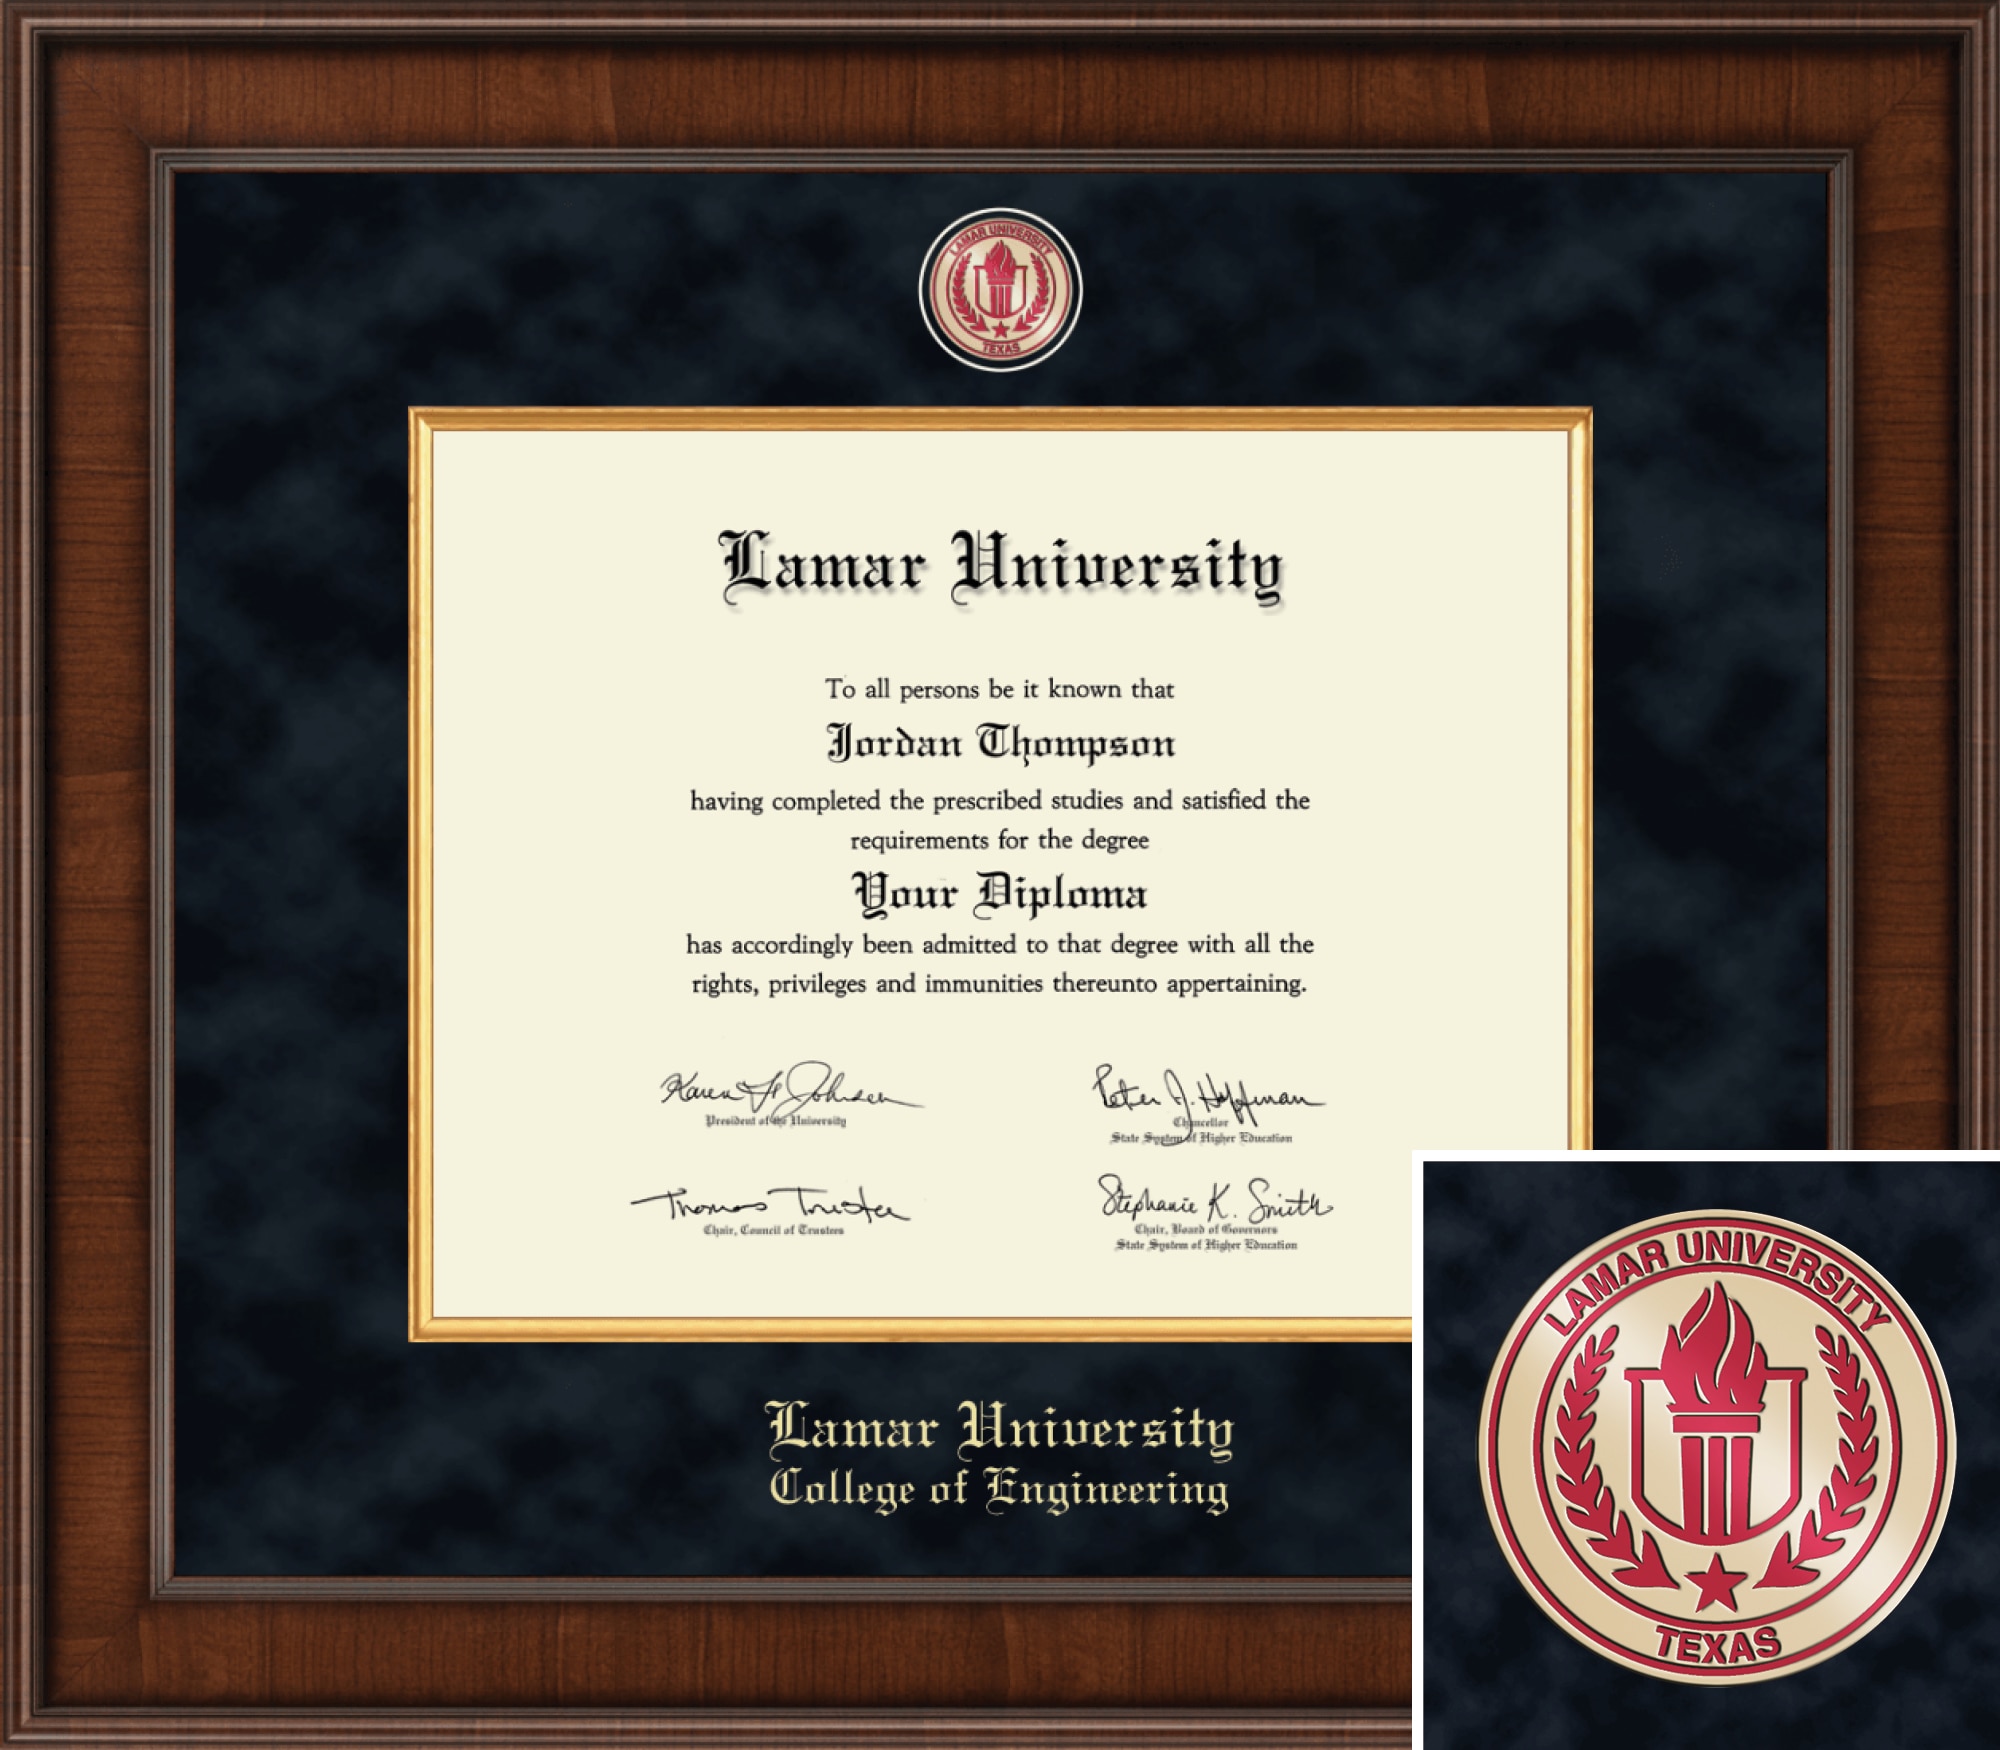 Church Hill Classics 11" x 14" Presidential Walnut College of Engineering Diploma Frame